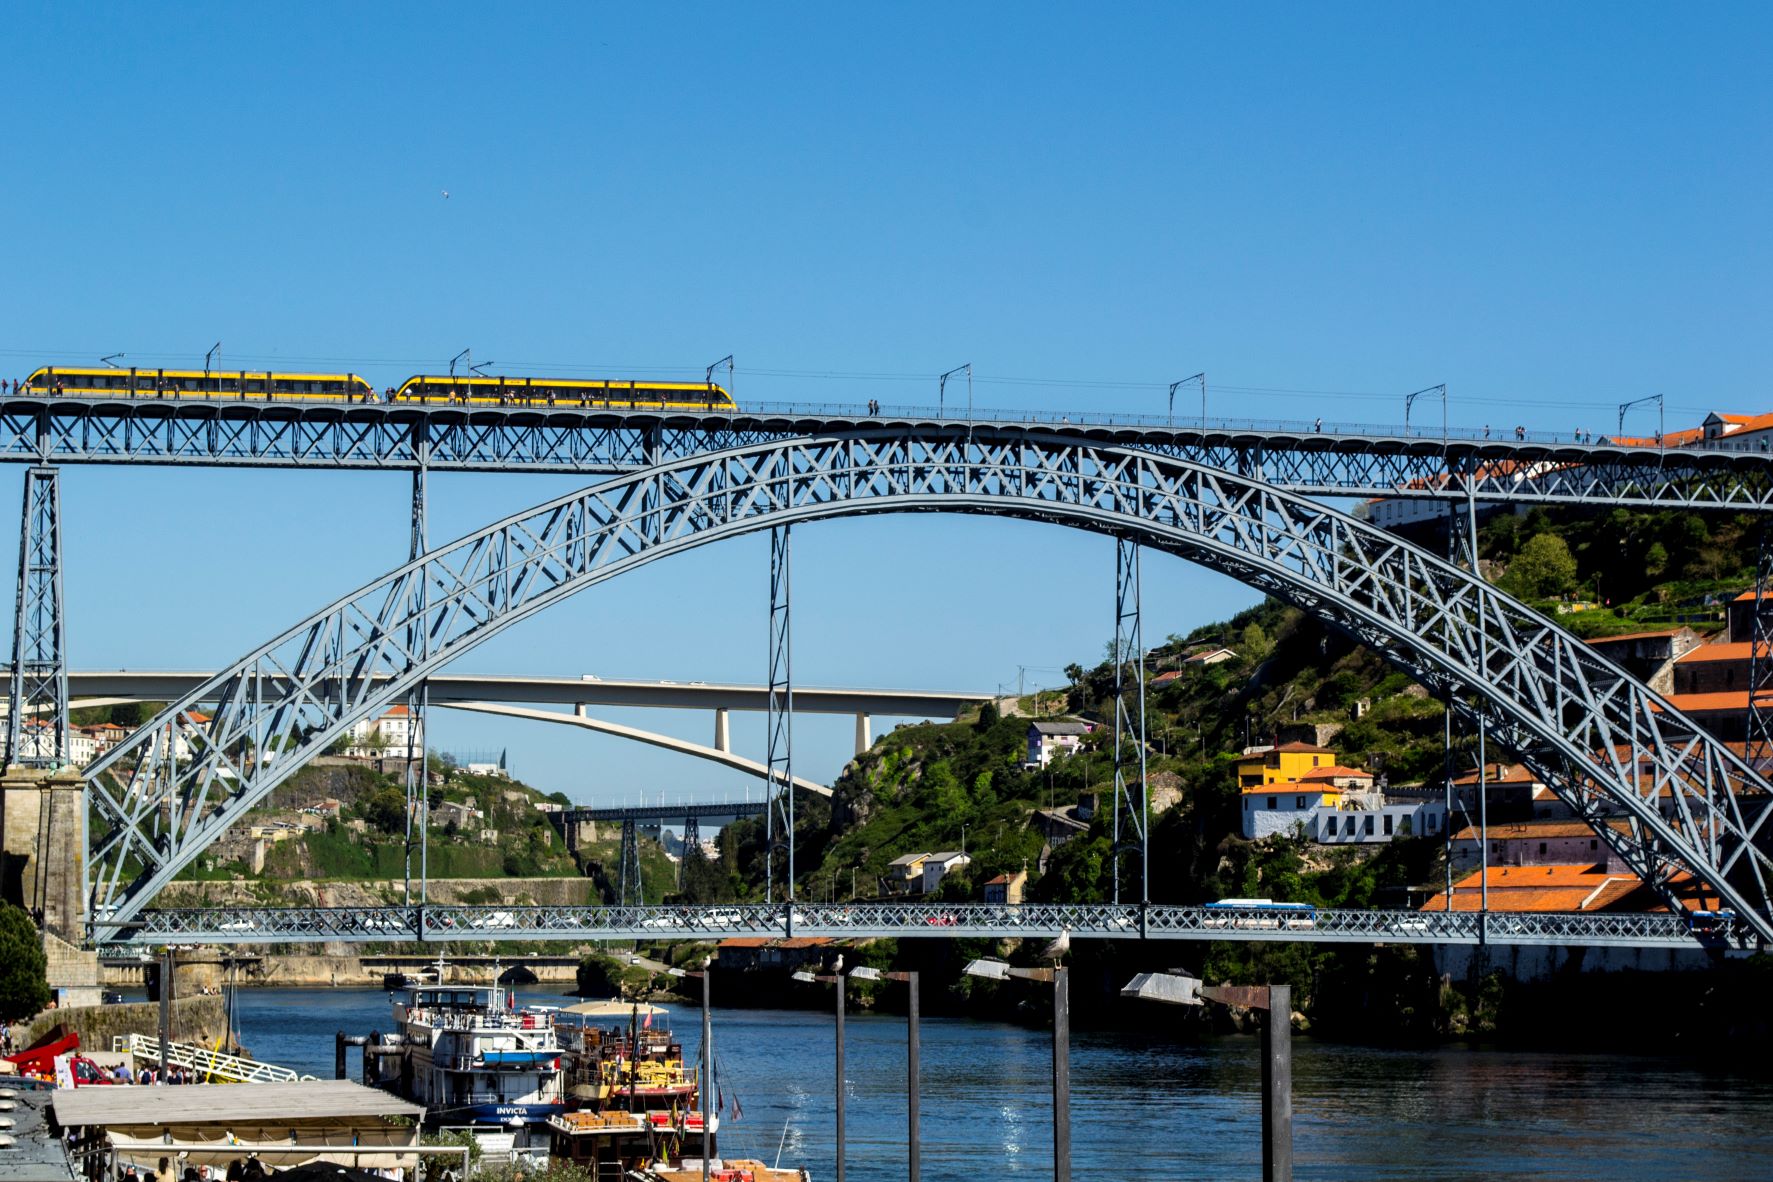 Top less known things about Porto